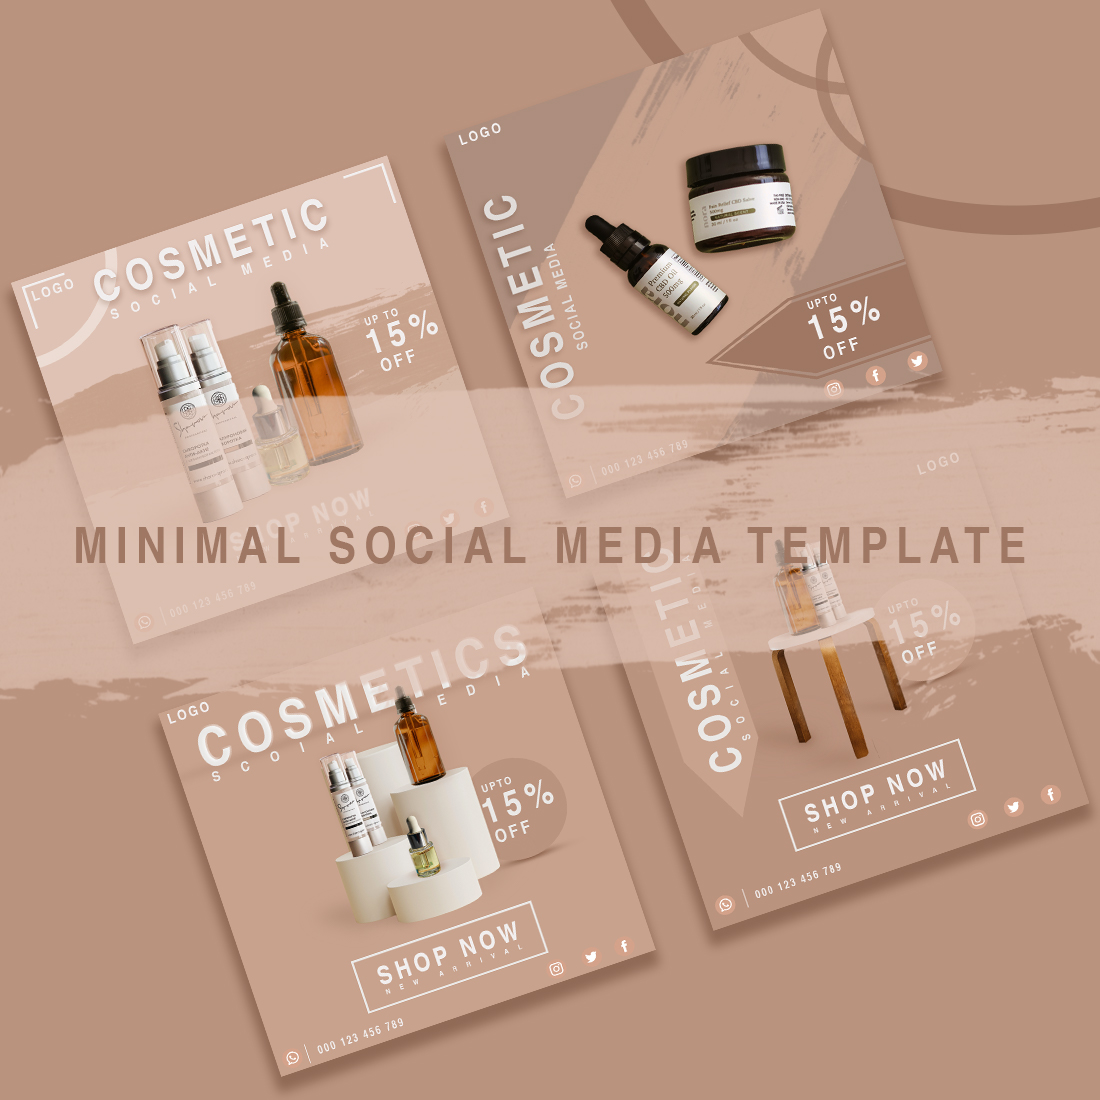 Fashion and beauty Instagram cosmetic social media post template preview image.